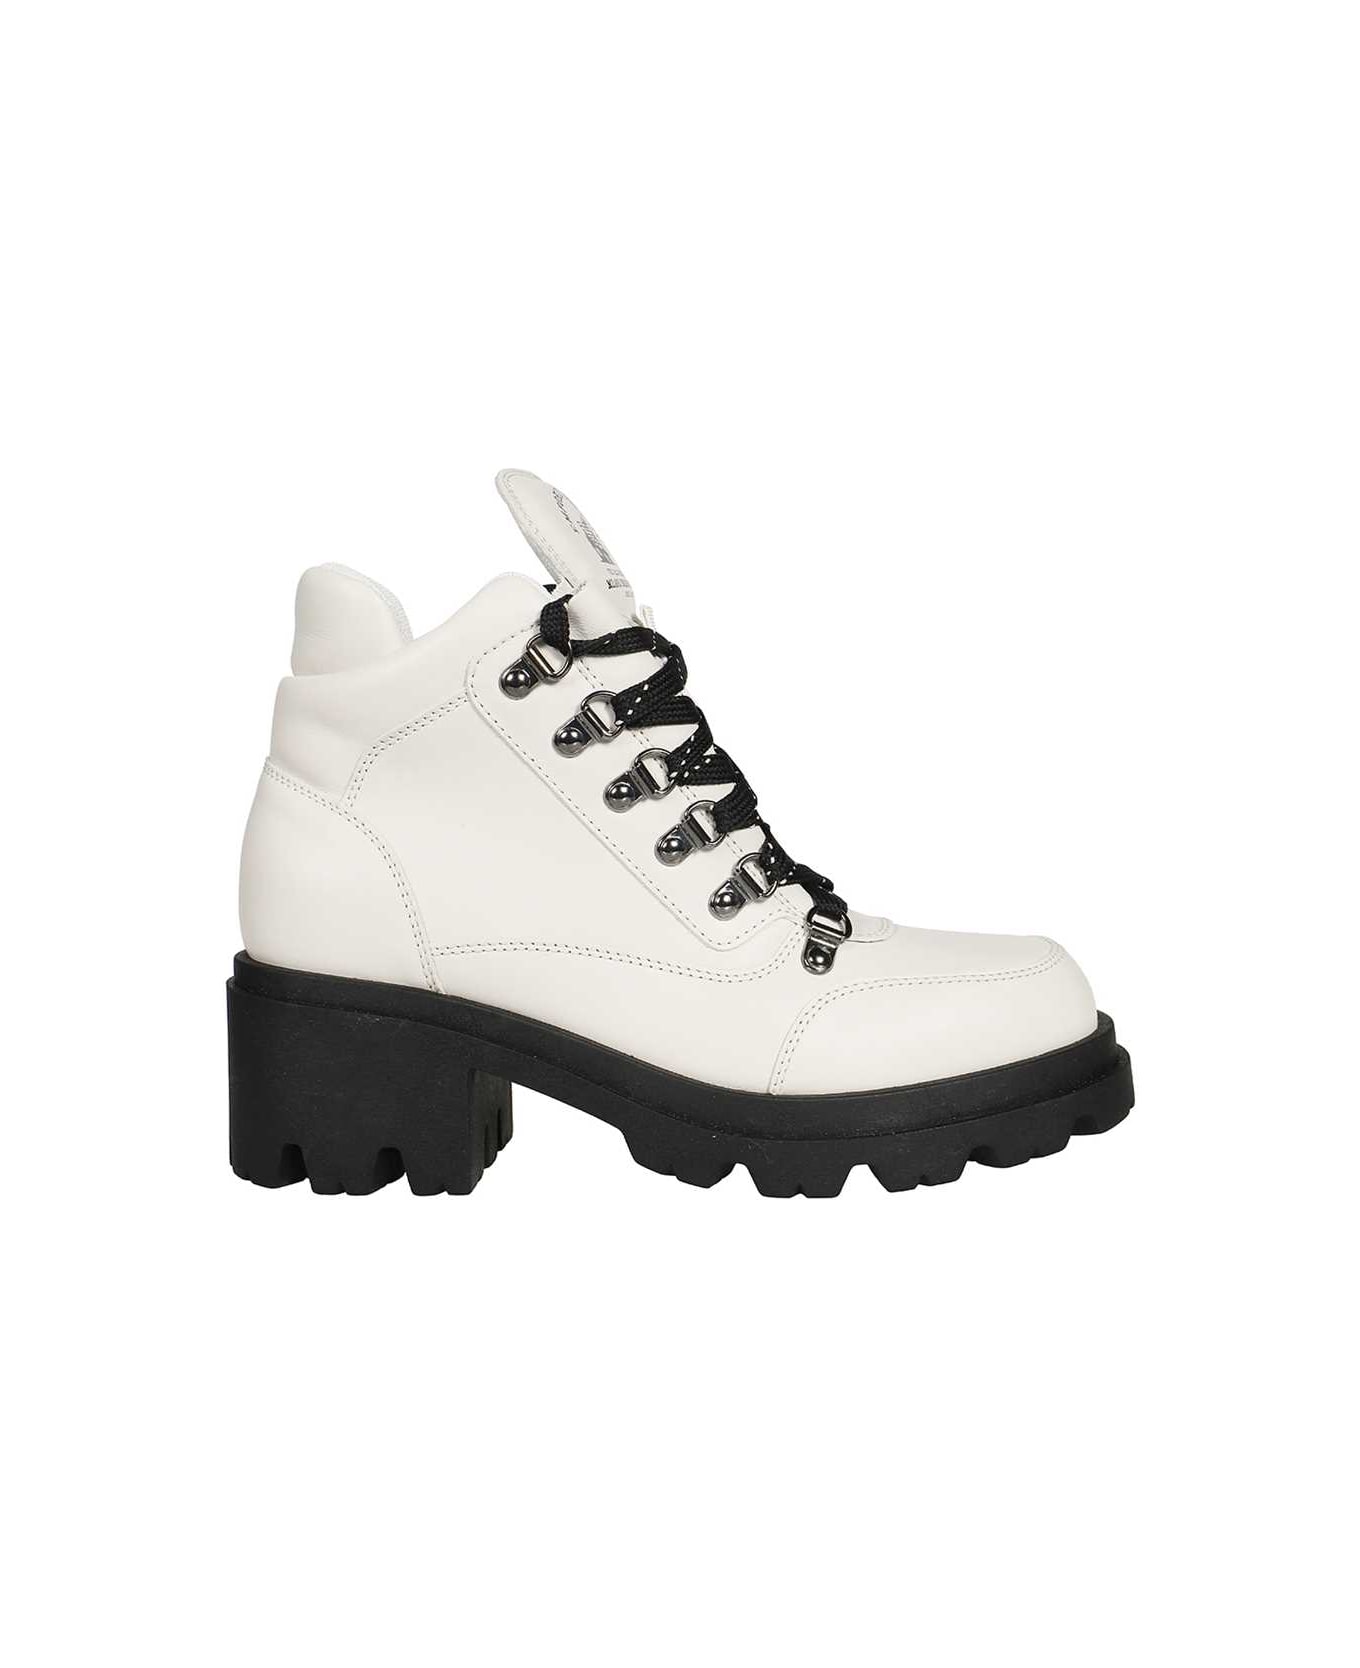 Emporio Armani Leather Lace-up Boots - Ivory ブーツ